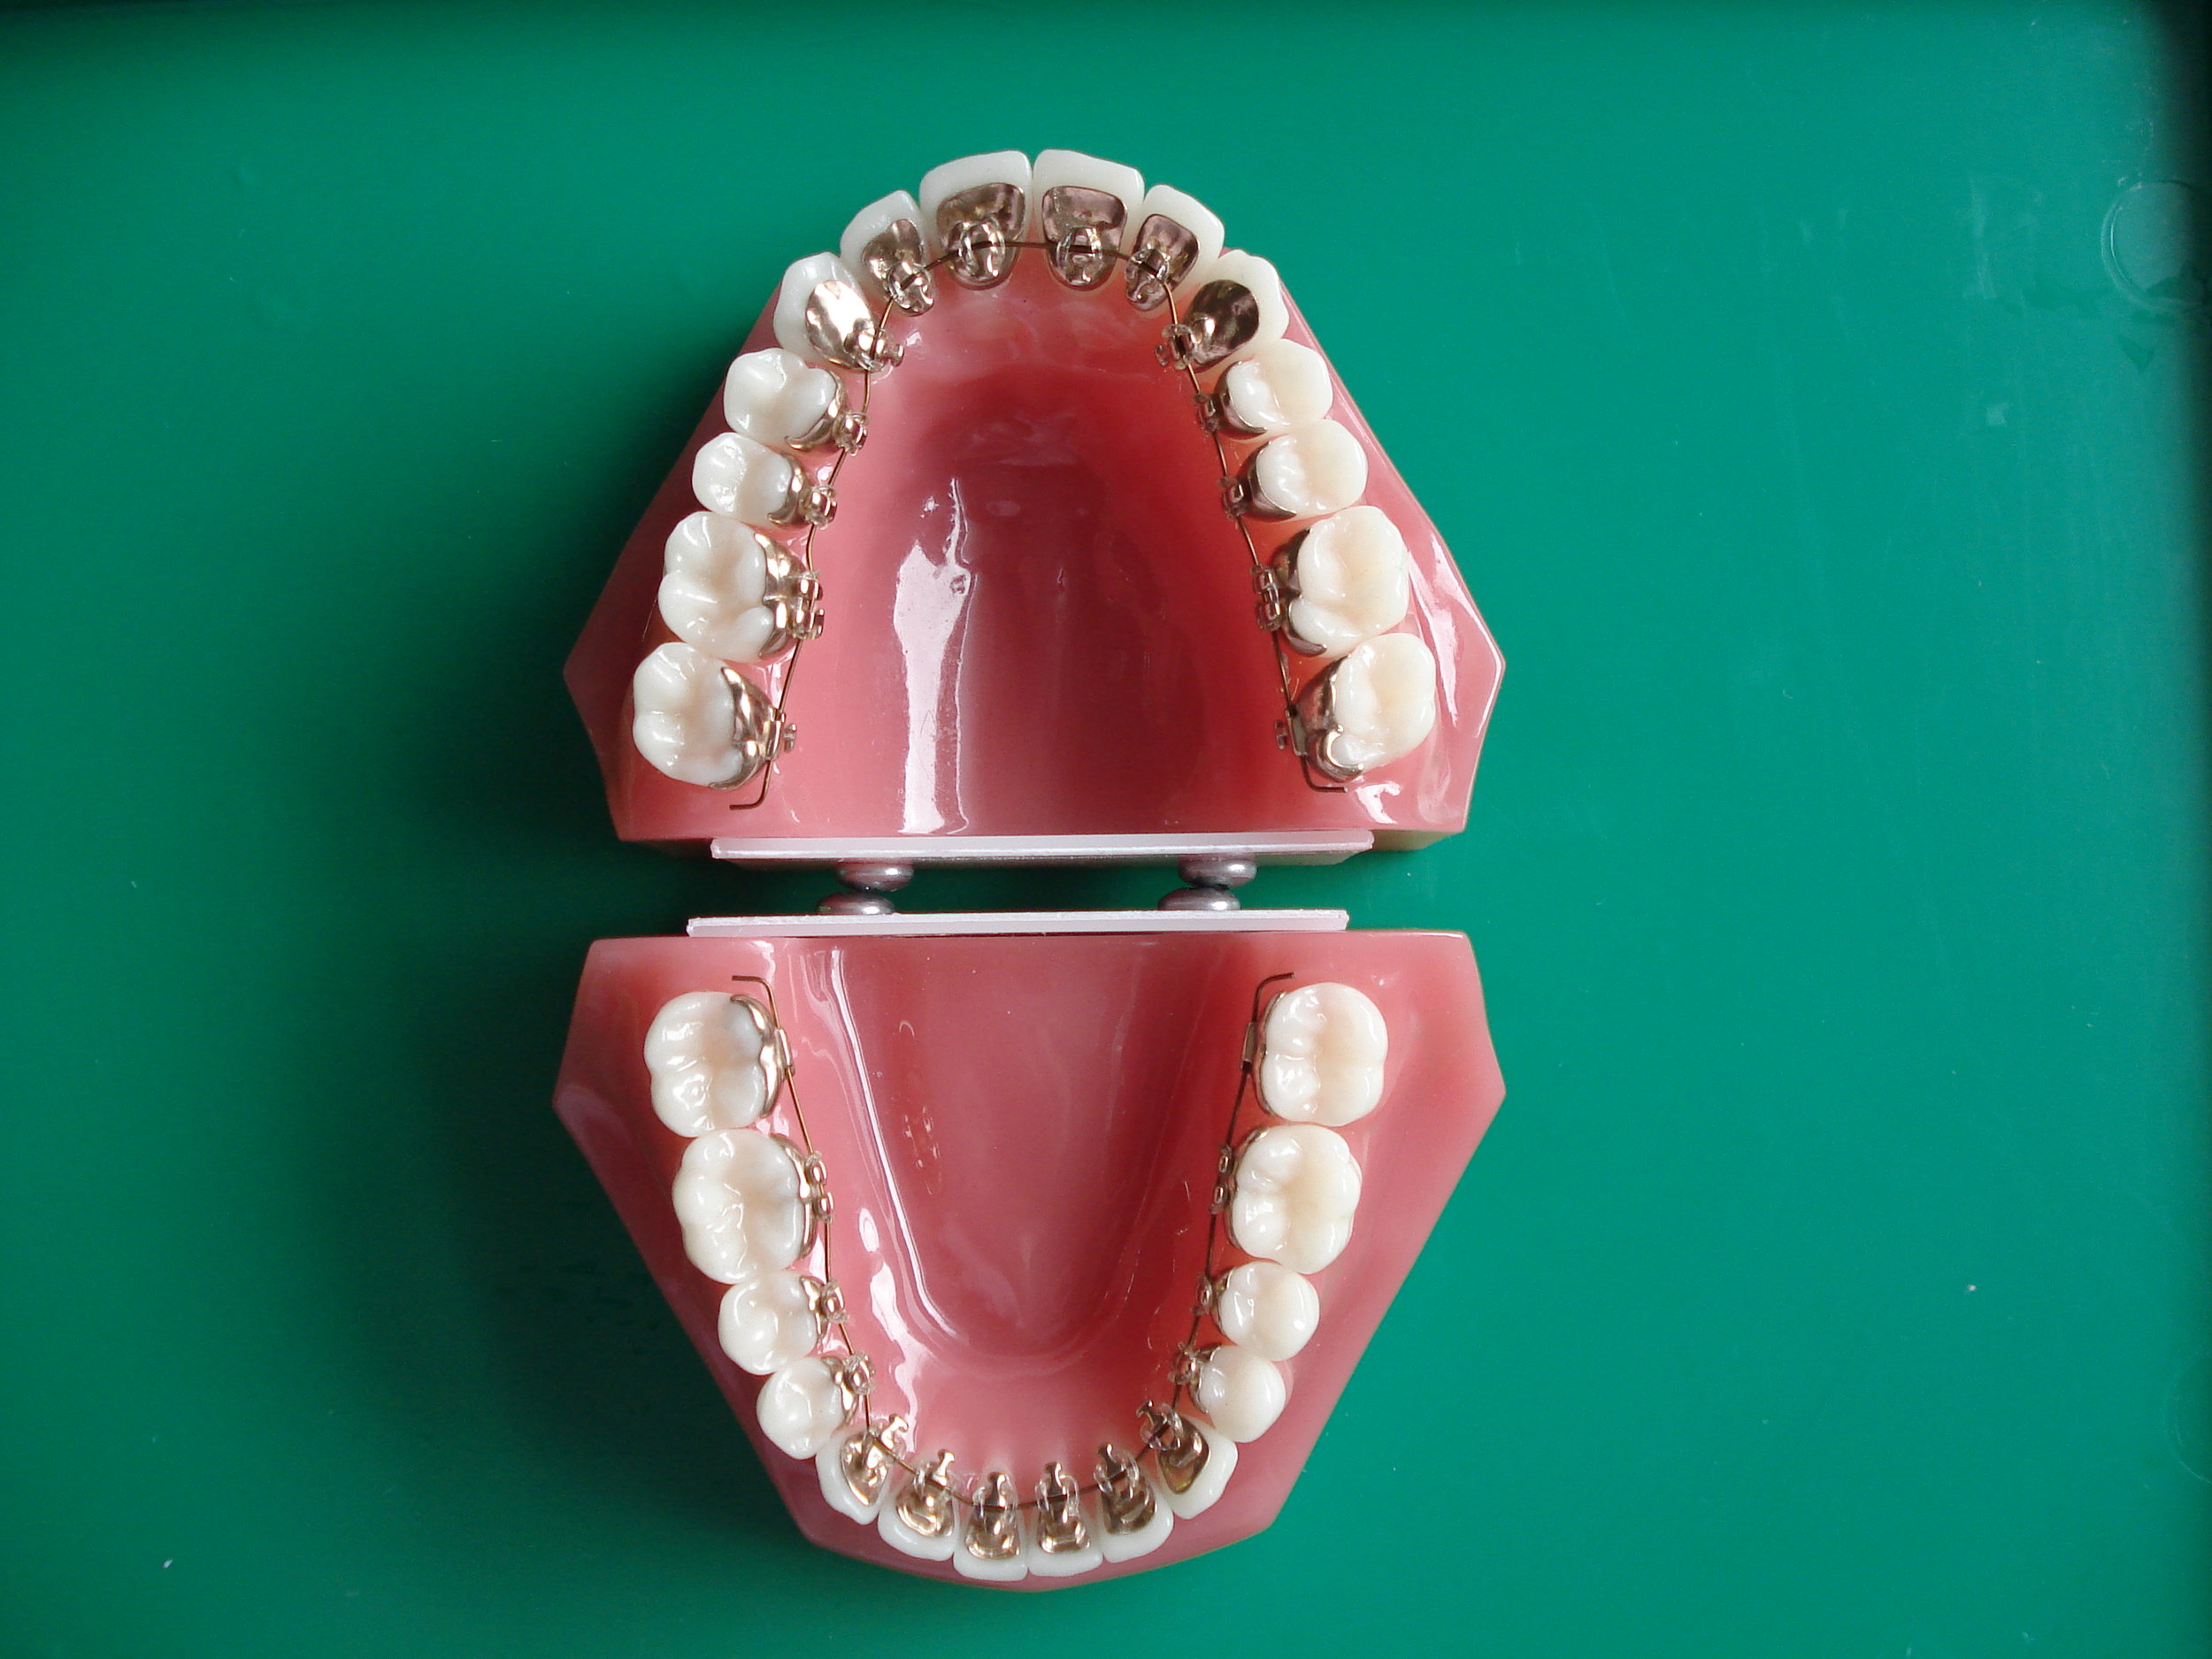 Double arch Incognito Lingual Braces mounted on a plastic model.